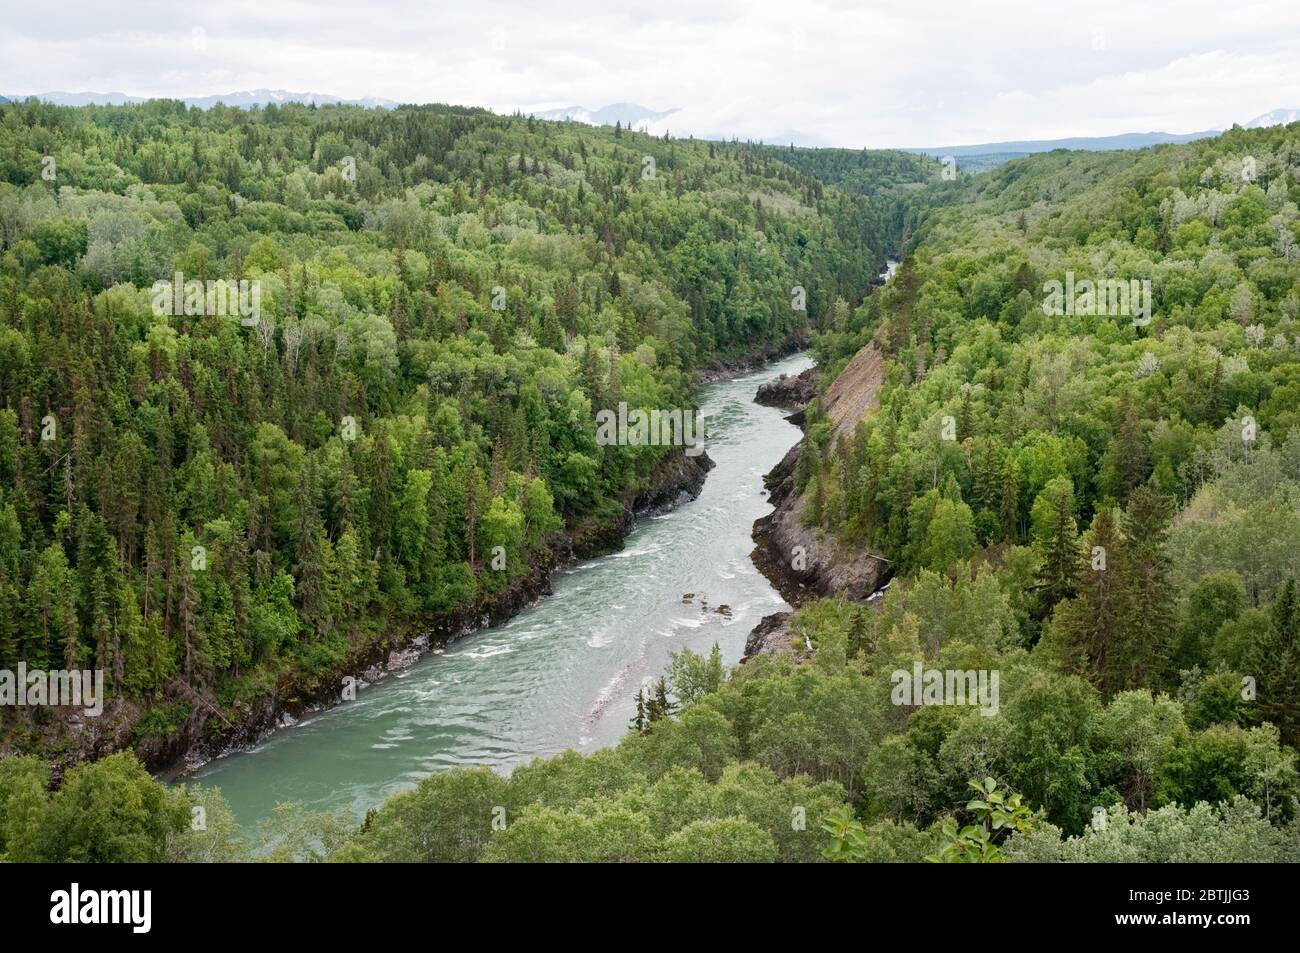 The Bulkley River Valley and canyon, a tributary of the Skeena River, Near Hazelton, northern British Columbia, Canada. Stock Photo